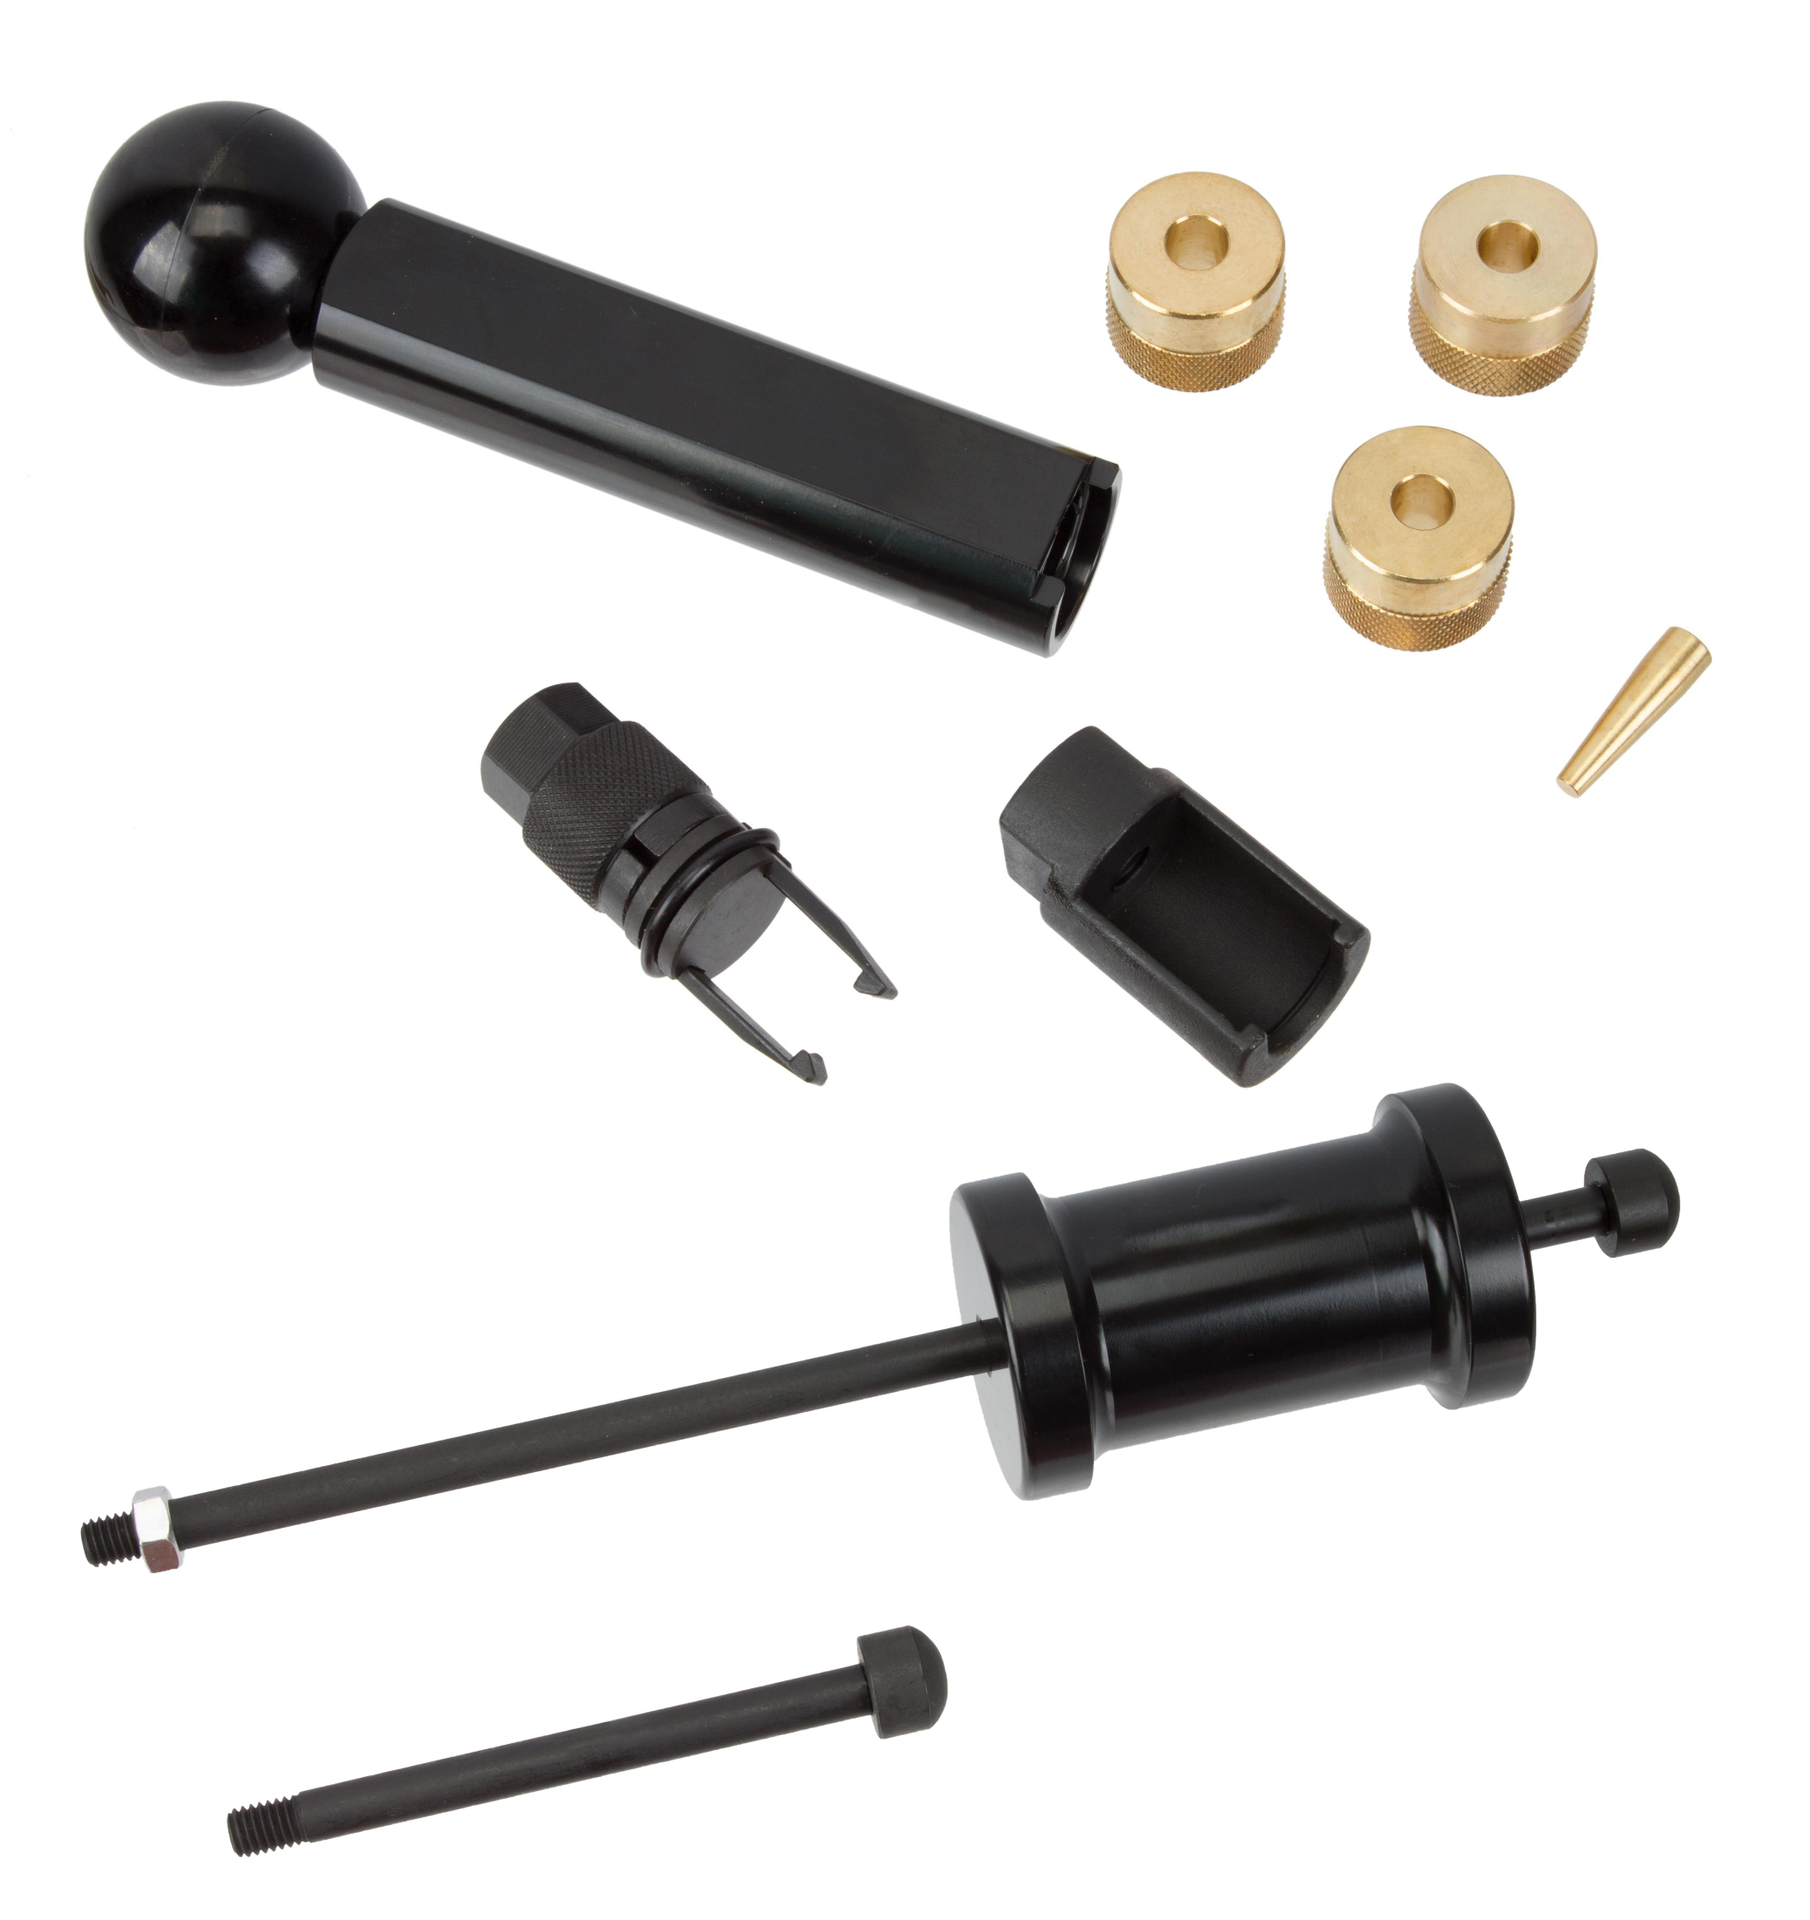 TFSI & TSI Complete Assembly Tool Kit for Injectors